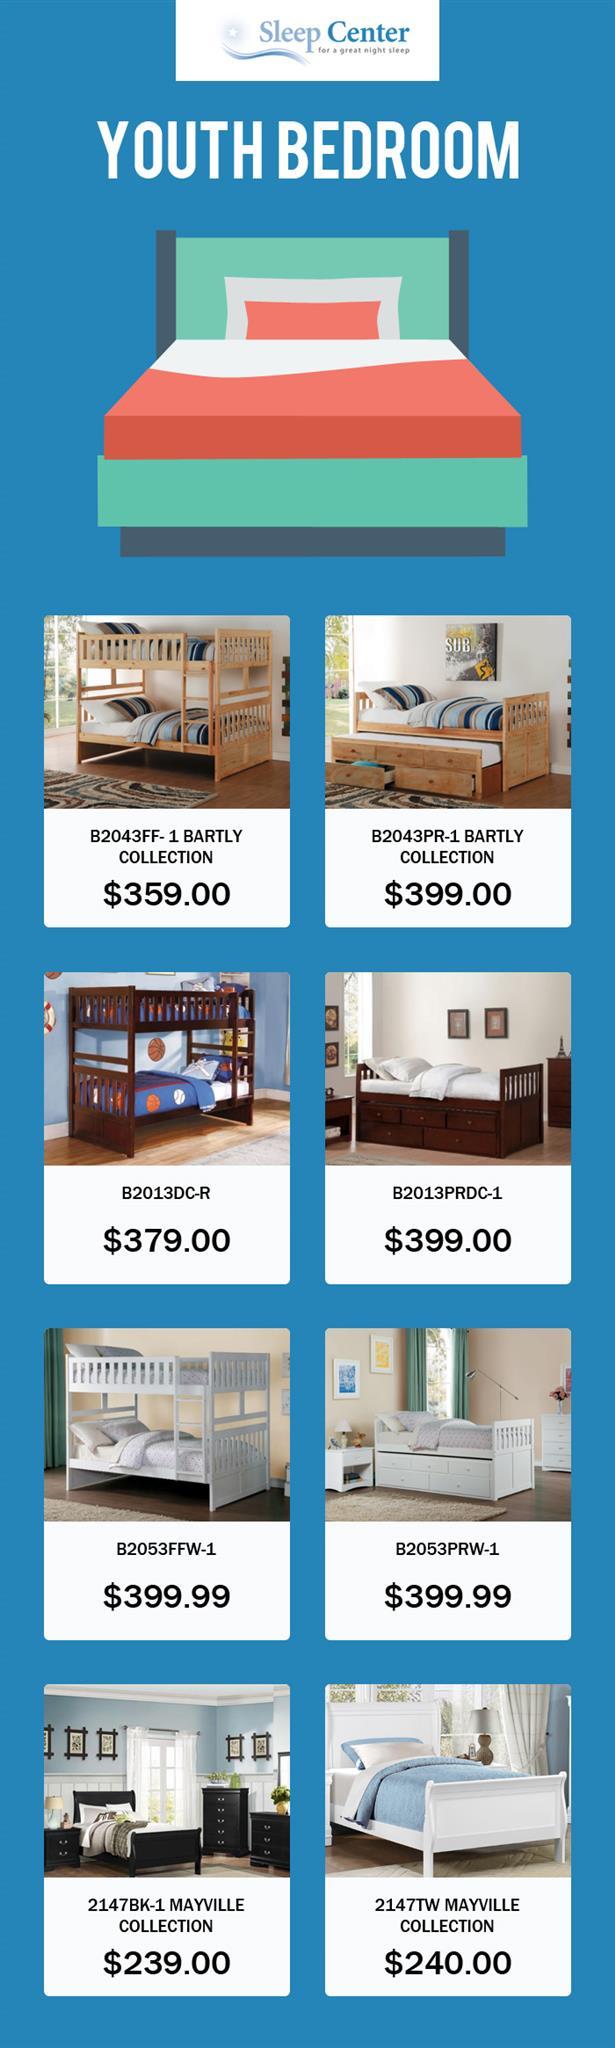 Sleep Center – Your One-Stop-Shop to Buy Youth Bedroom Furniture in Sacramento & Davis, CA